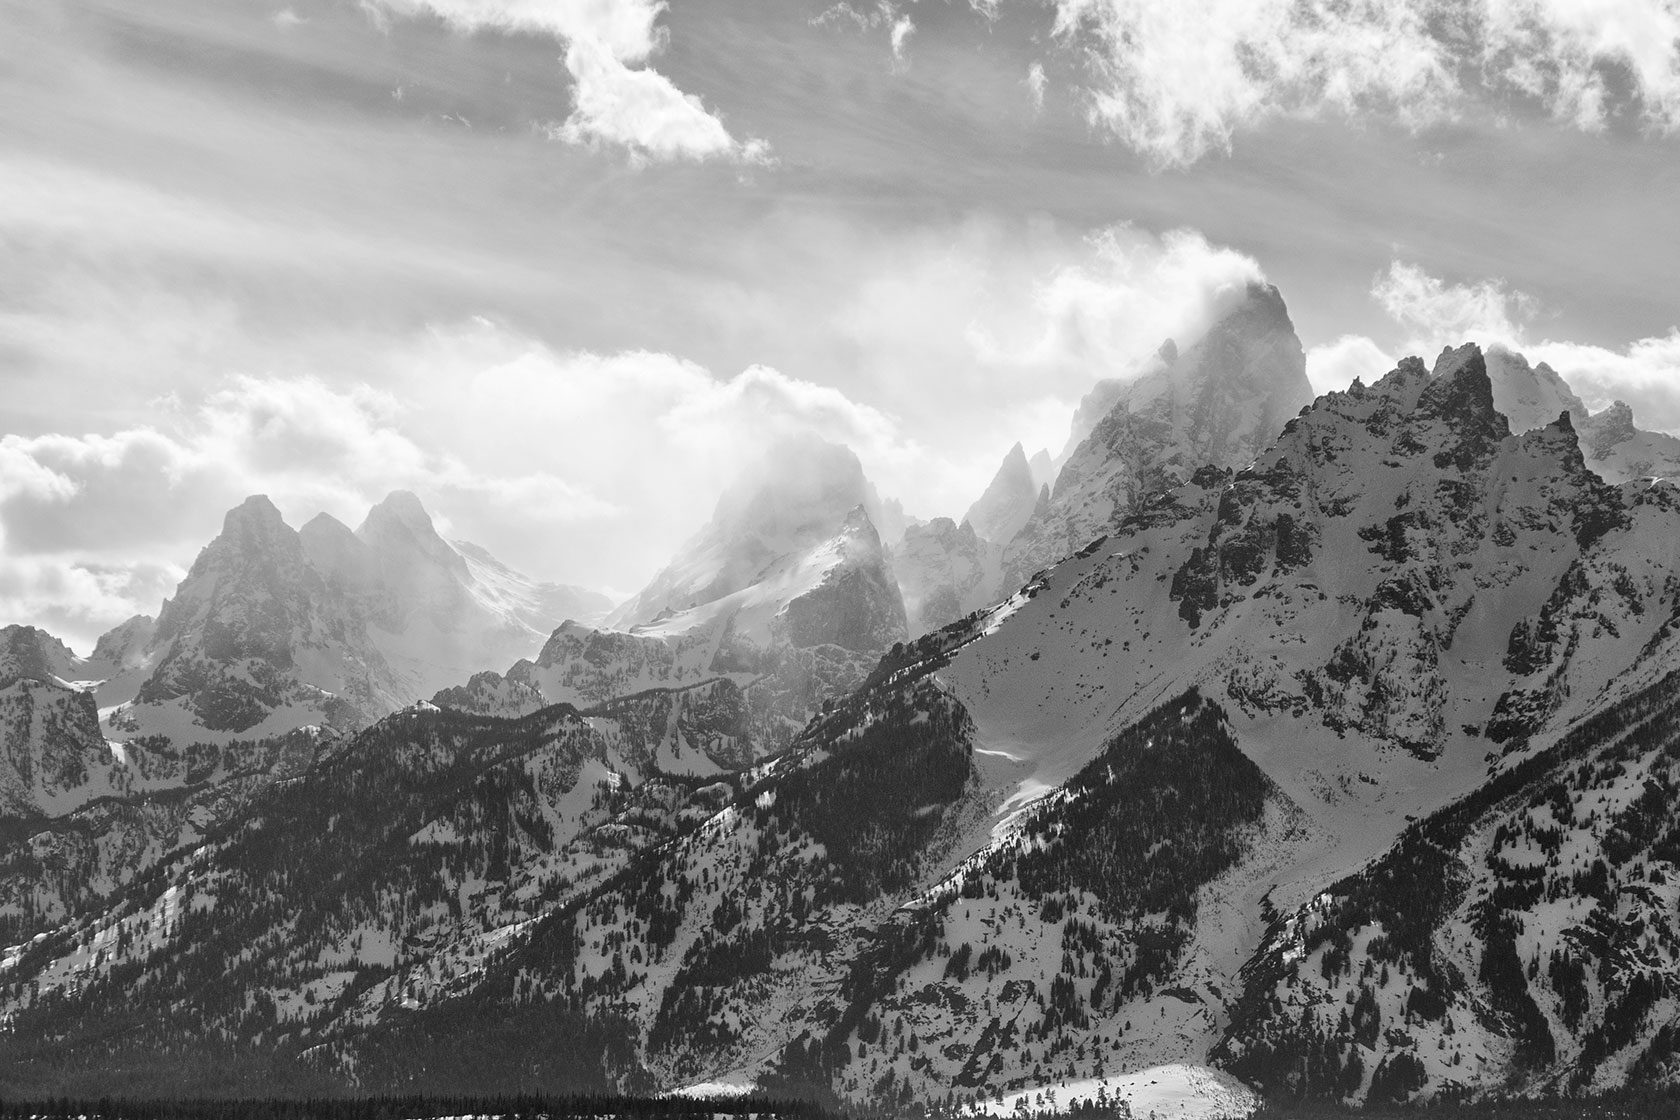 Spring Clouds in Black & White - Stephen Williams Photography, Jackson Wyoming